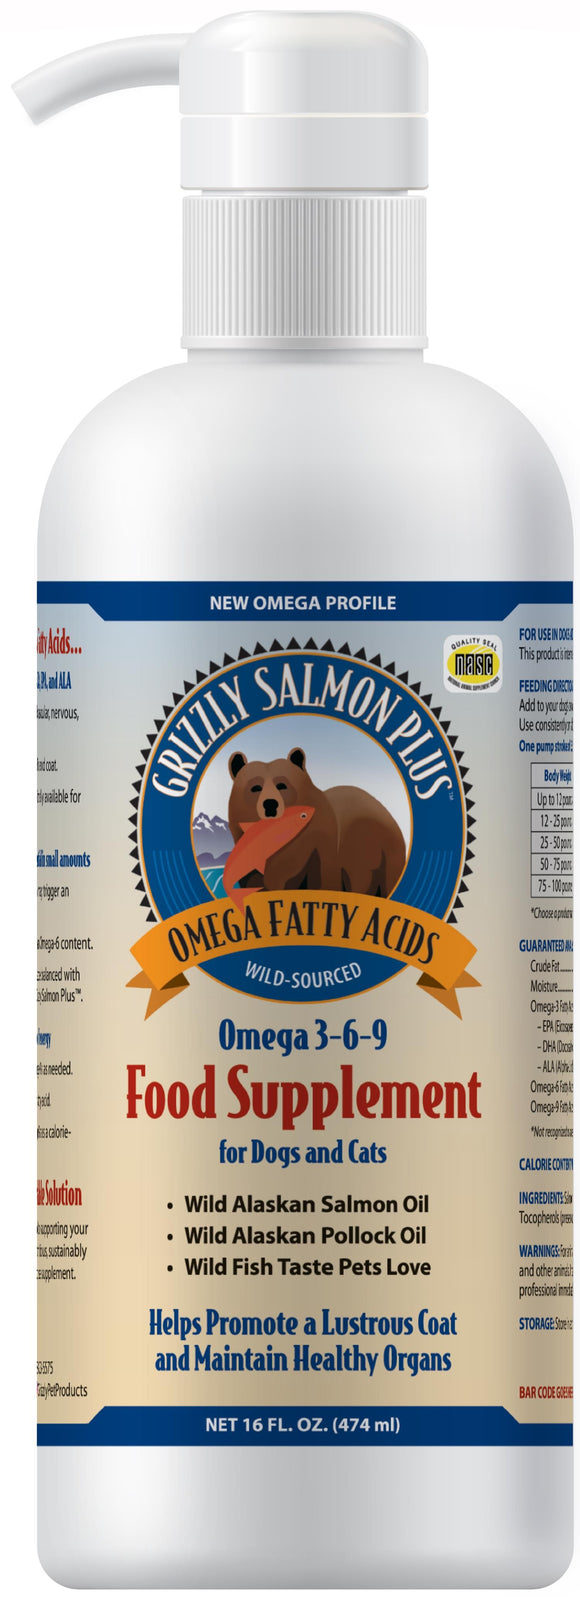 Grizzly Salmon Oil For Dogs, 8 or 16-oz Bottle